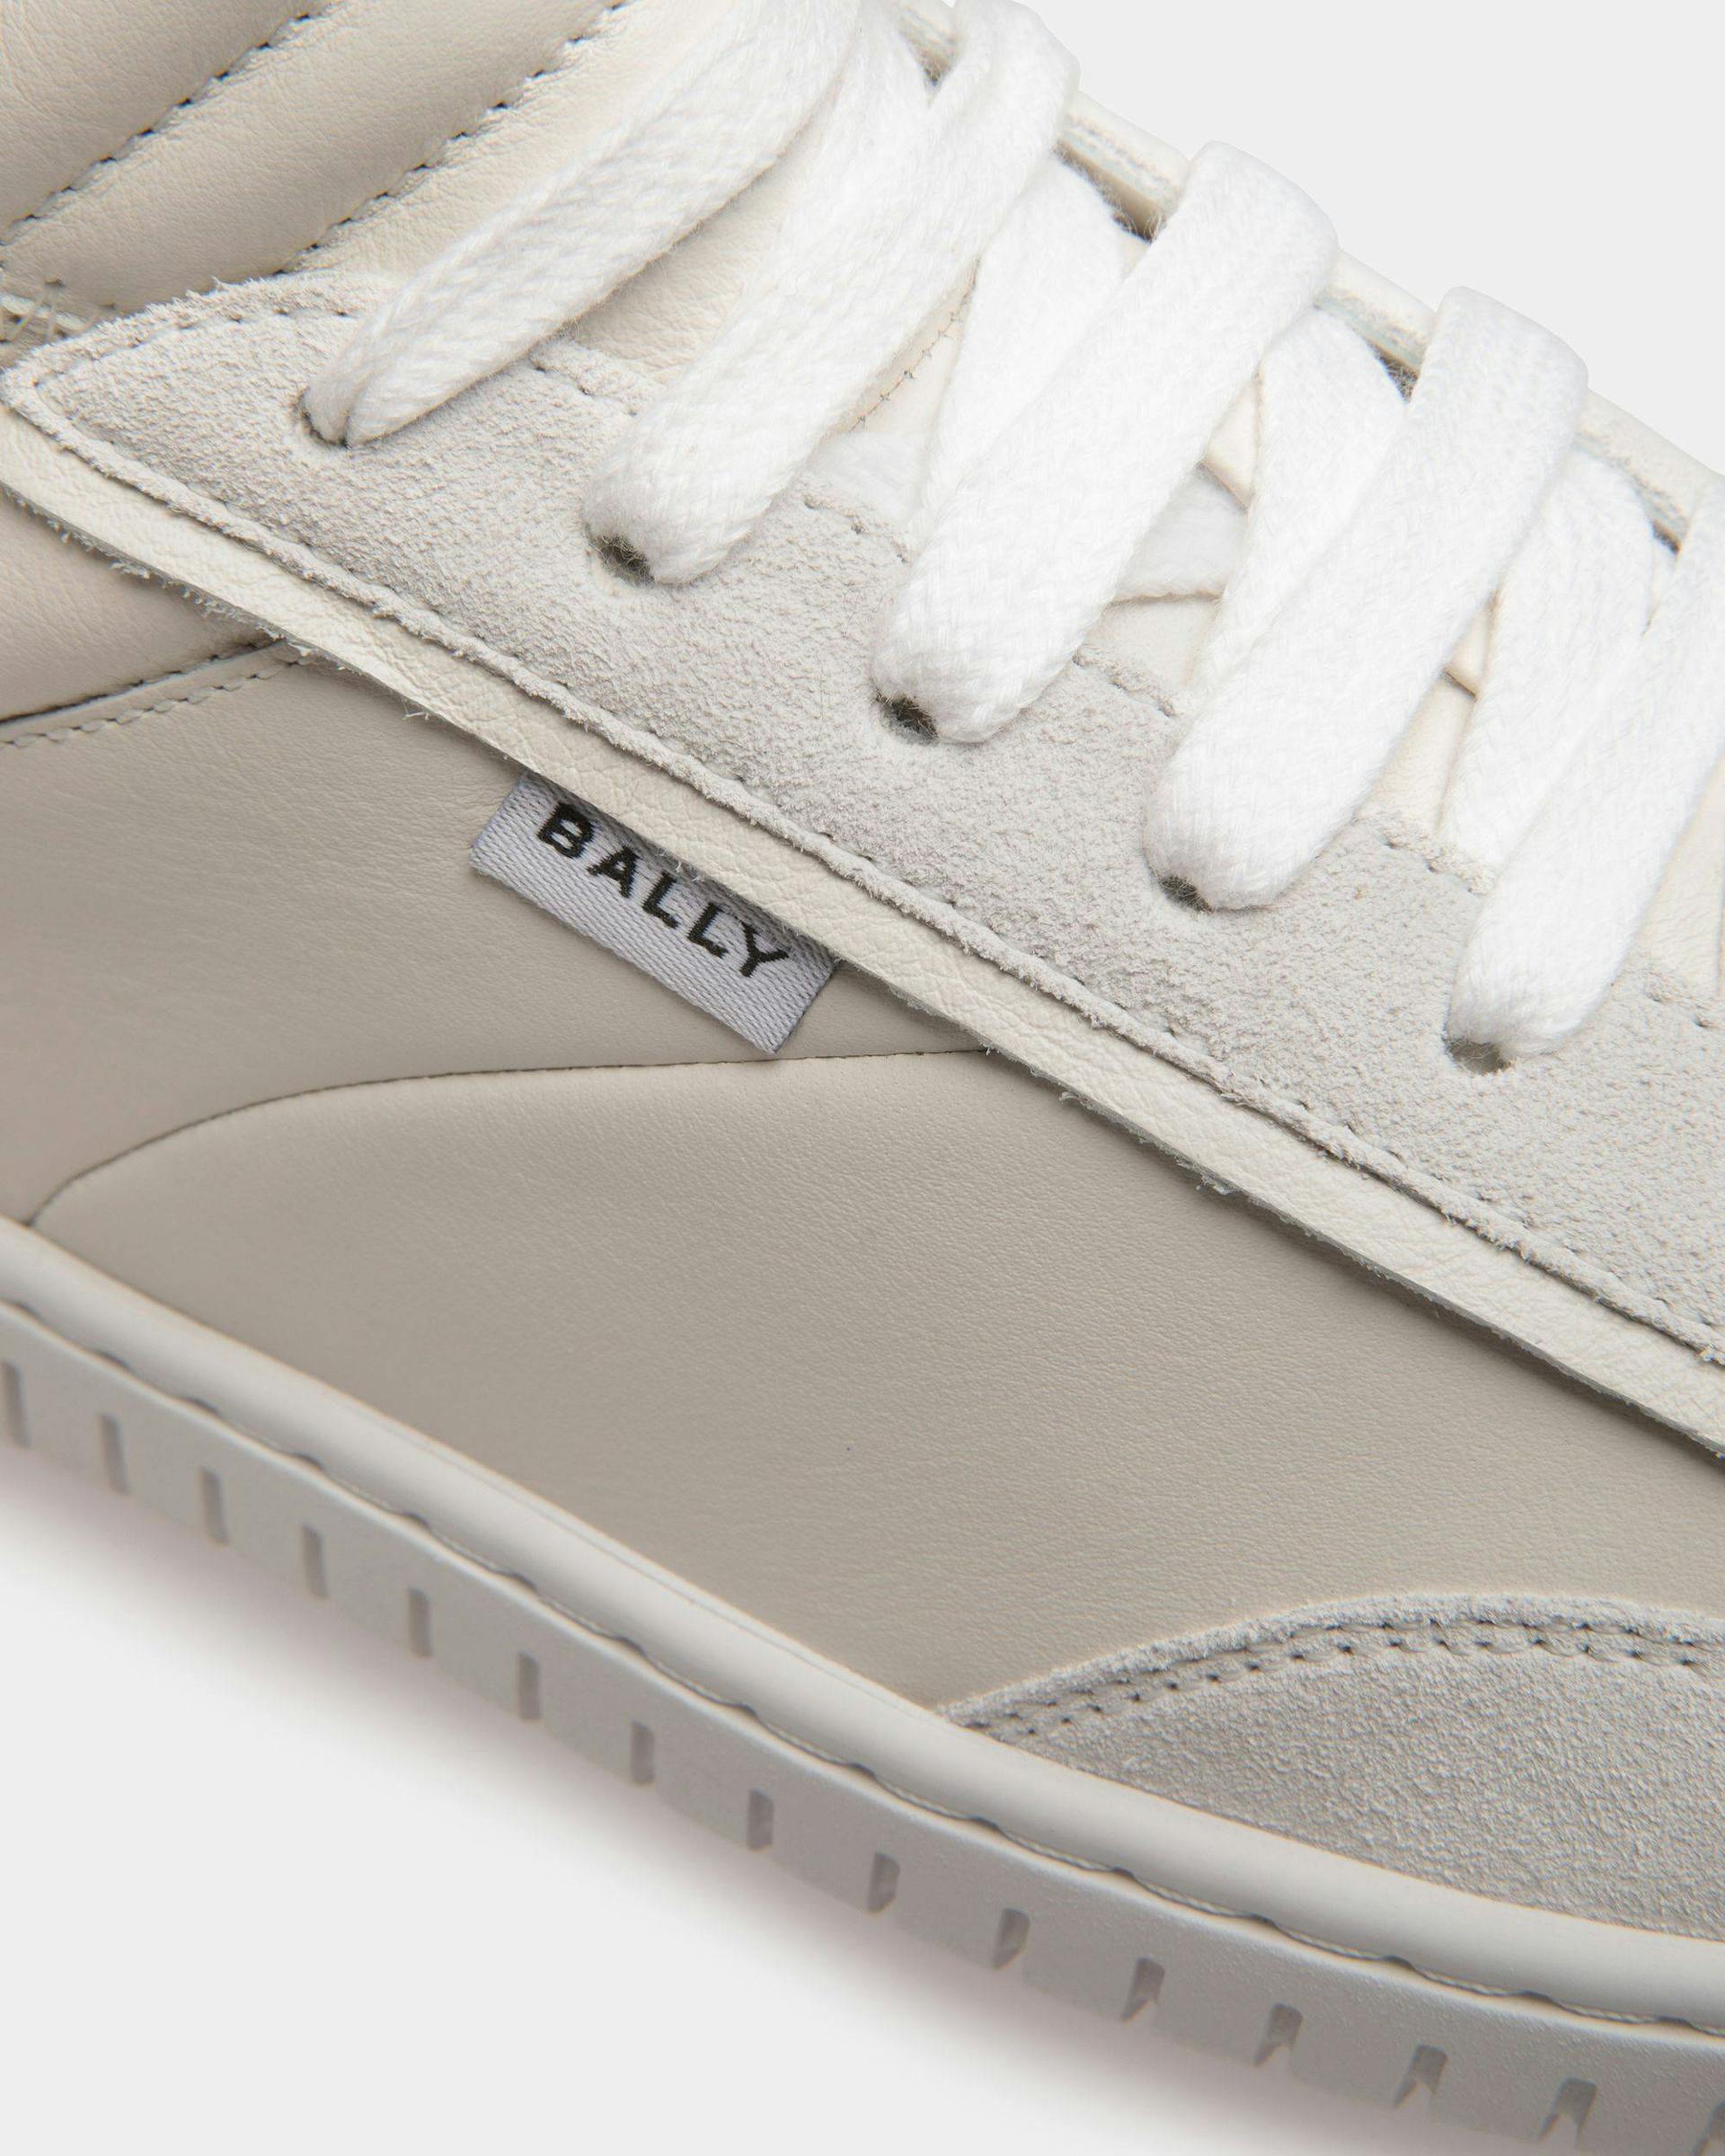 Women's Player Sneakers In White Leather | Bally | Still Life Detail